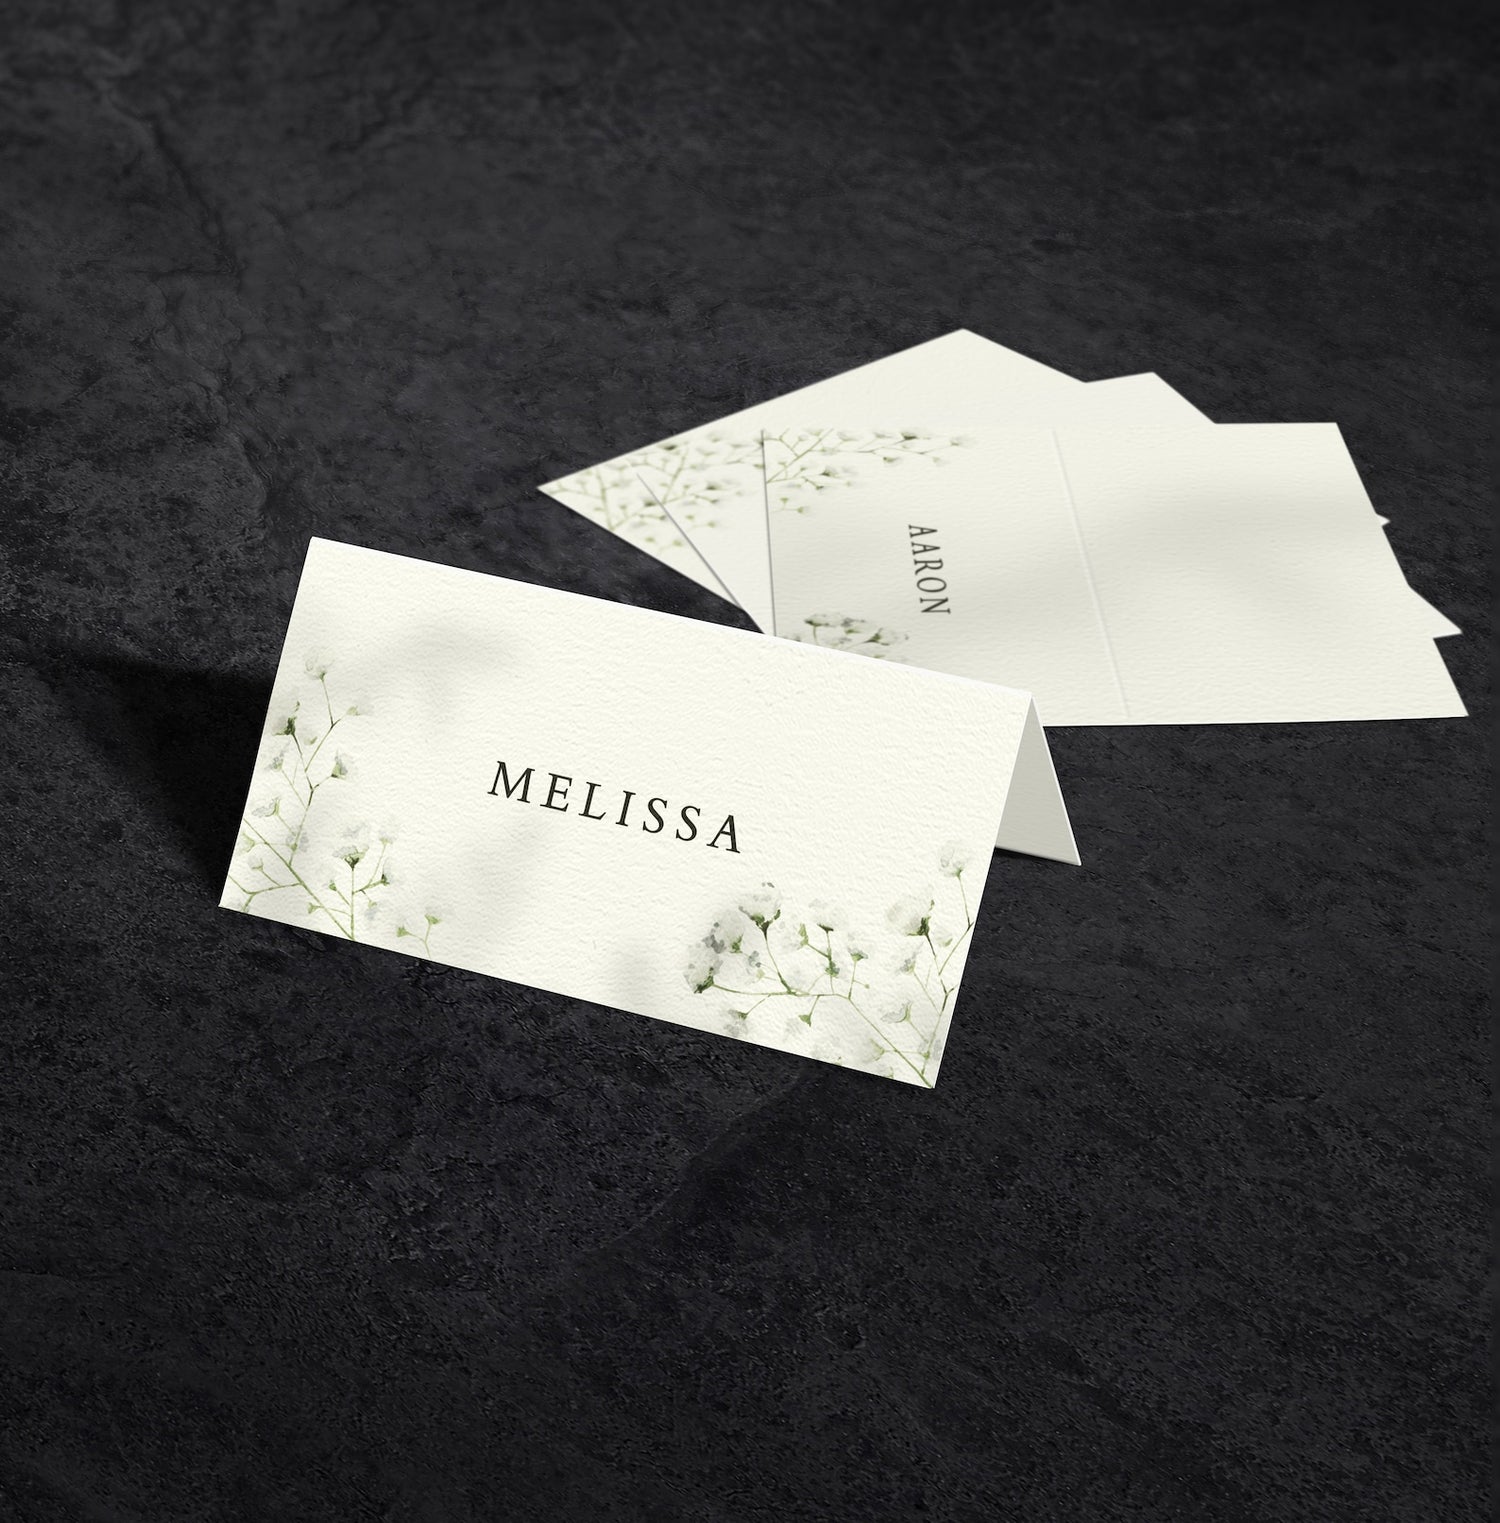 White Place Cards